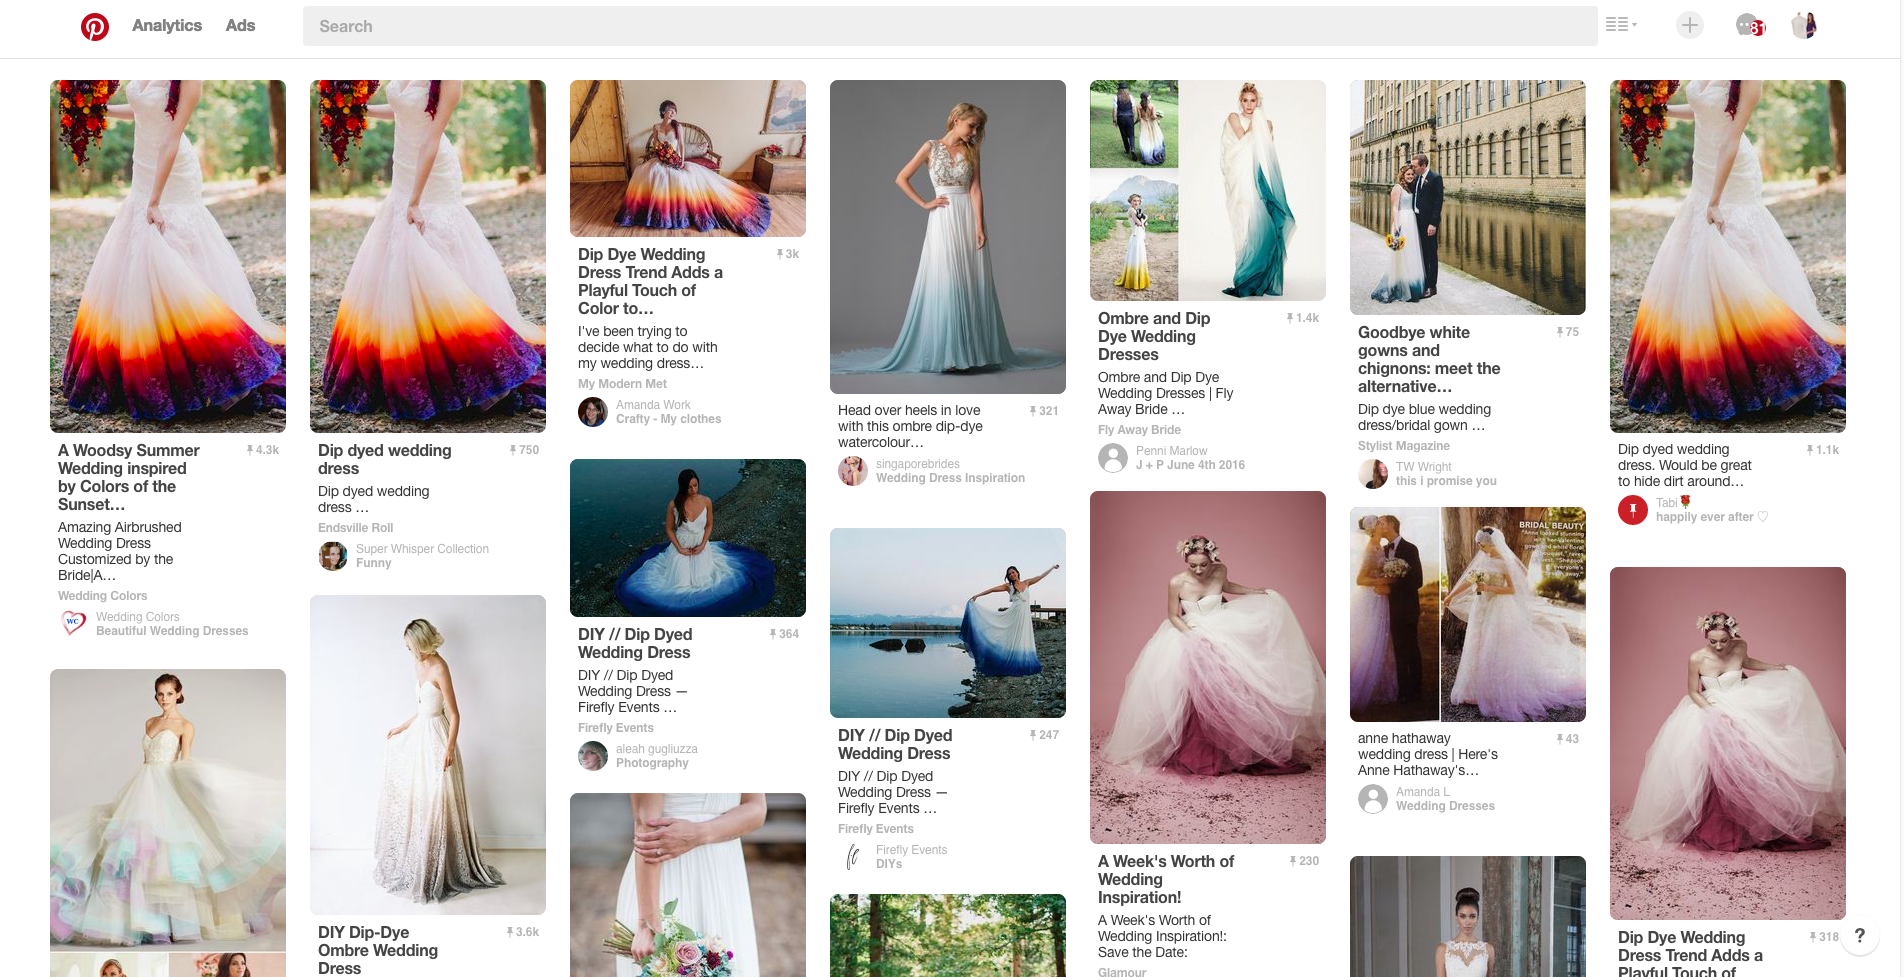 Photo credit: A screenshot of the keyword "dipped wedding dresses" search result on Pinterest.